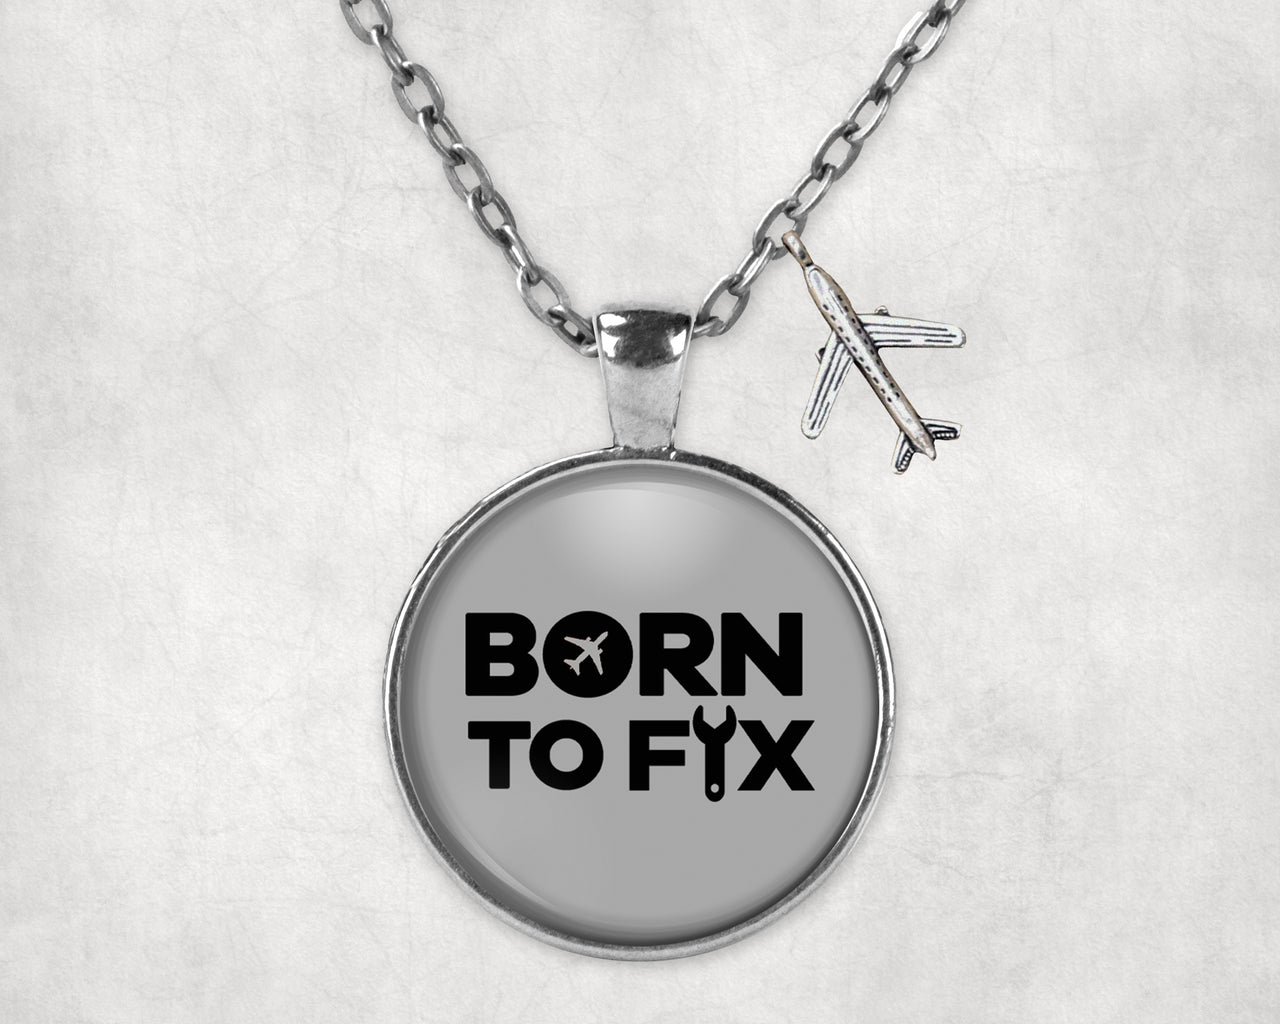 Born To Fix Airplanes Designed Necklaces